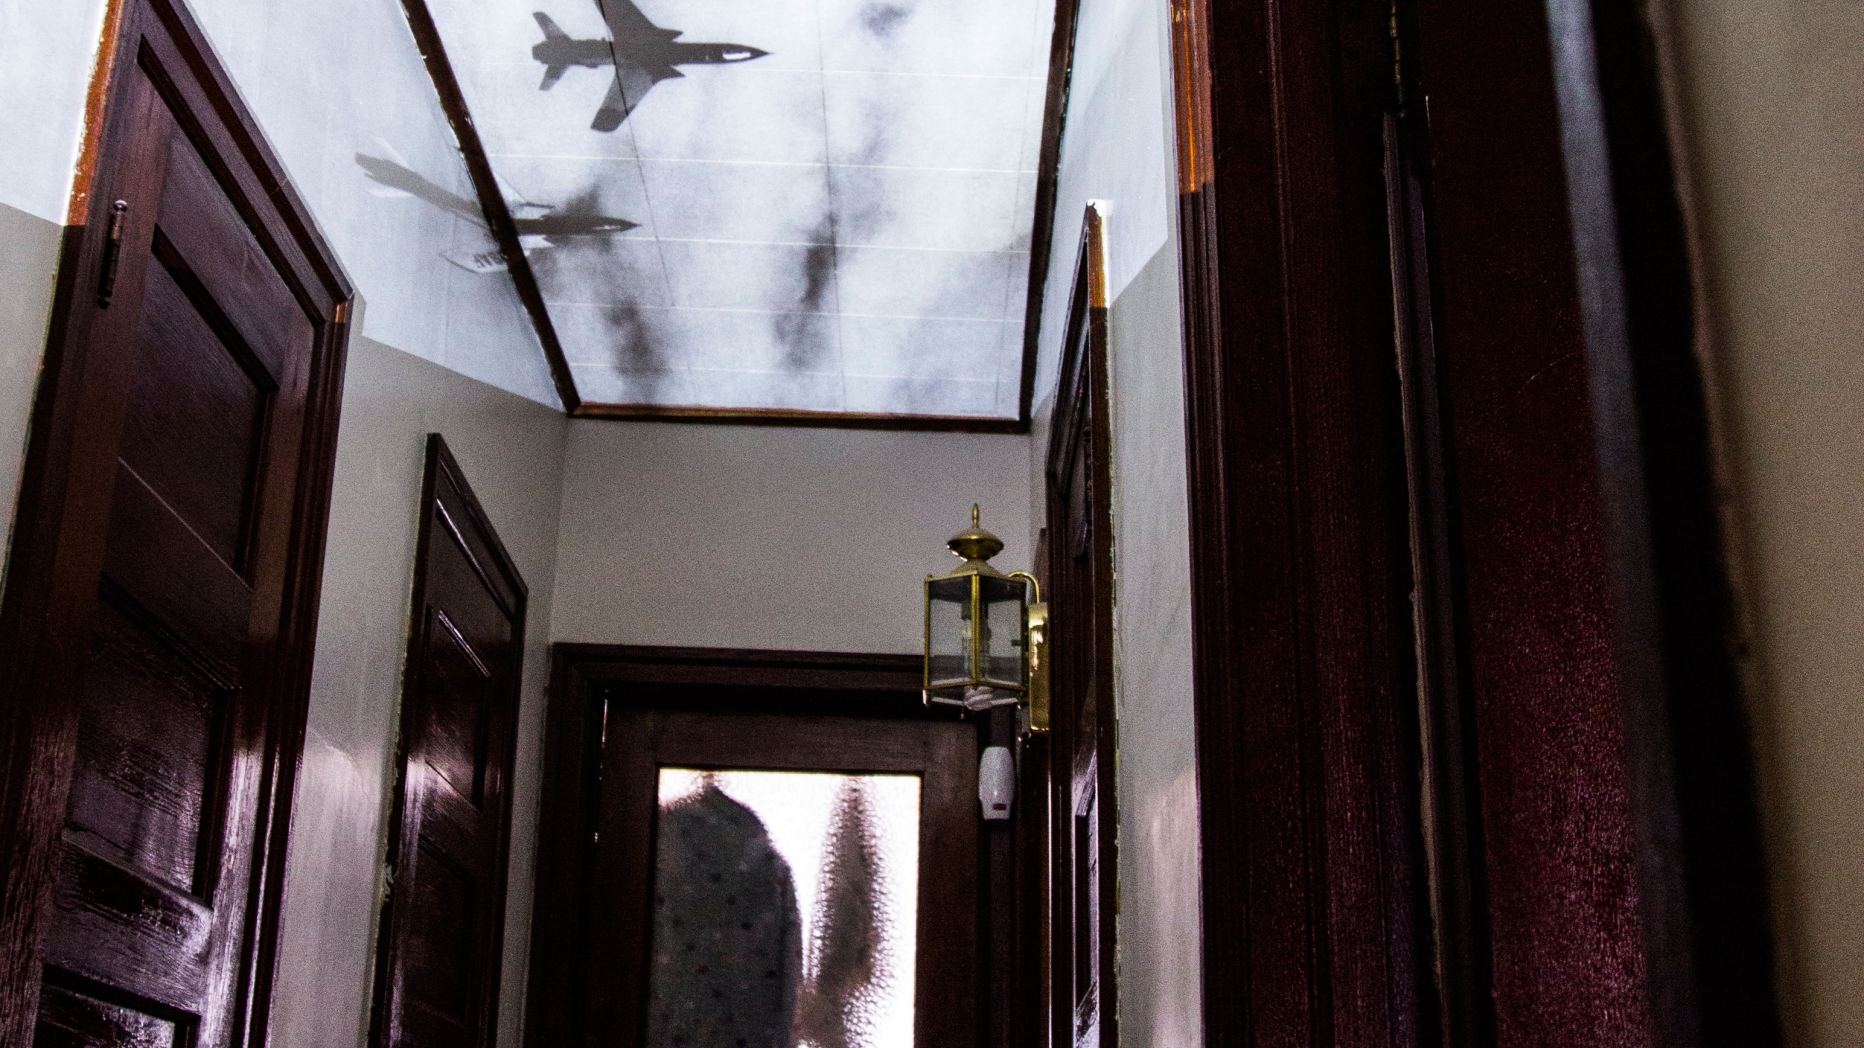 Hallway with images of bomber planes projected on to the ceiling.